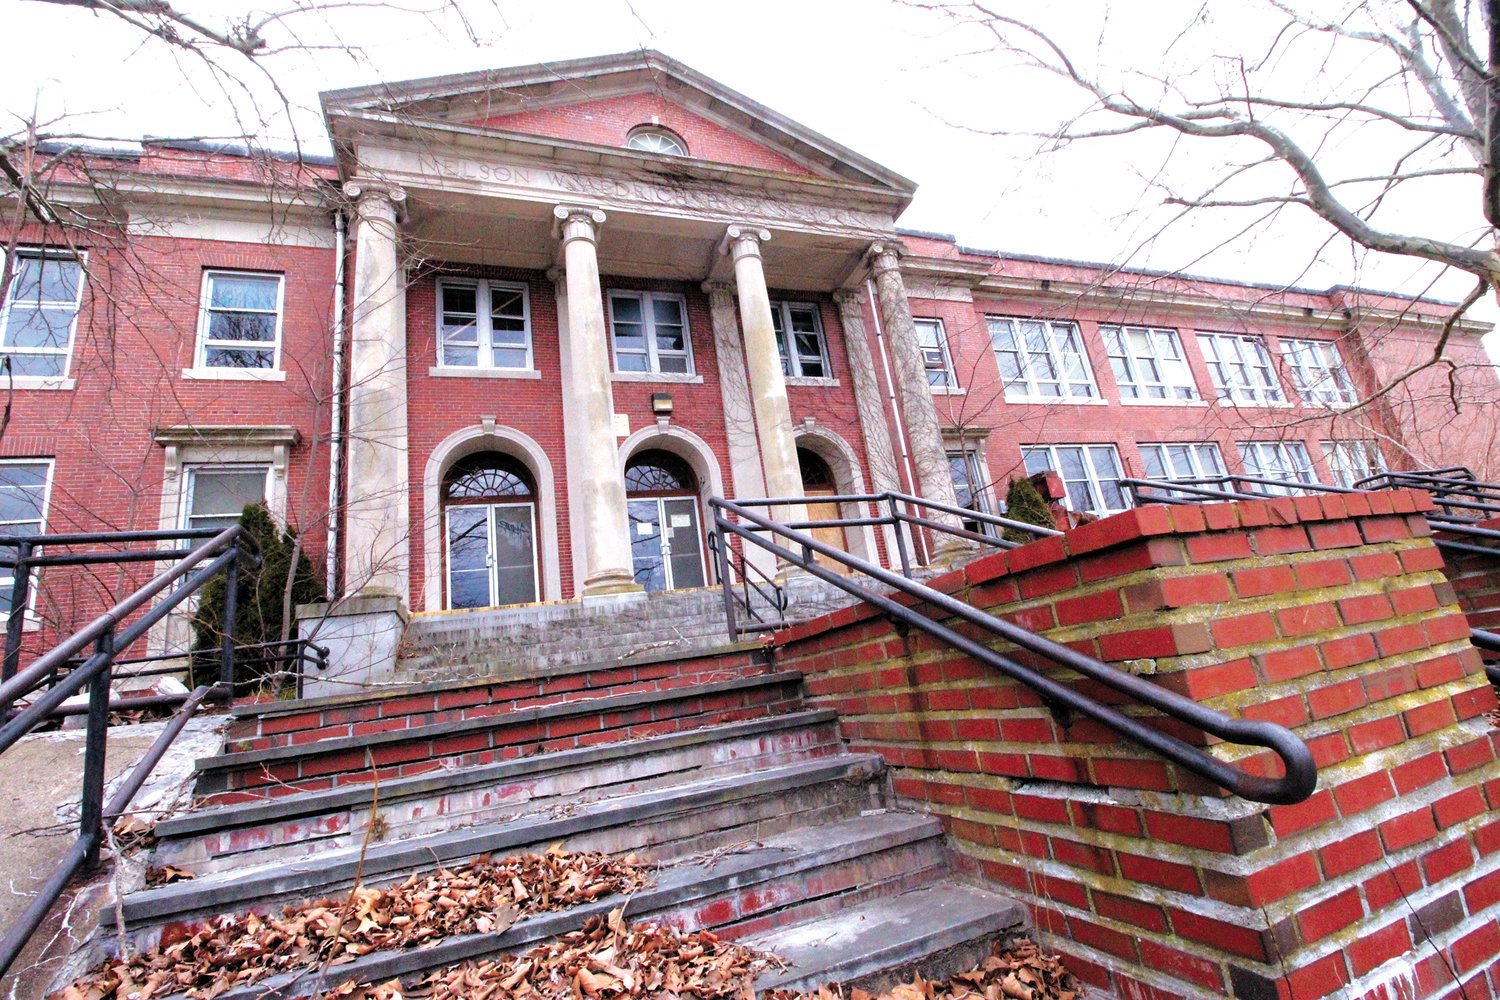 MAJESTIC PROFILE: Even with a few boarded up windows and grounds in need of attention, the former Aldrich Junior High School commands attention. (Warwick Beacon photos)